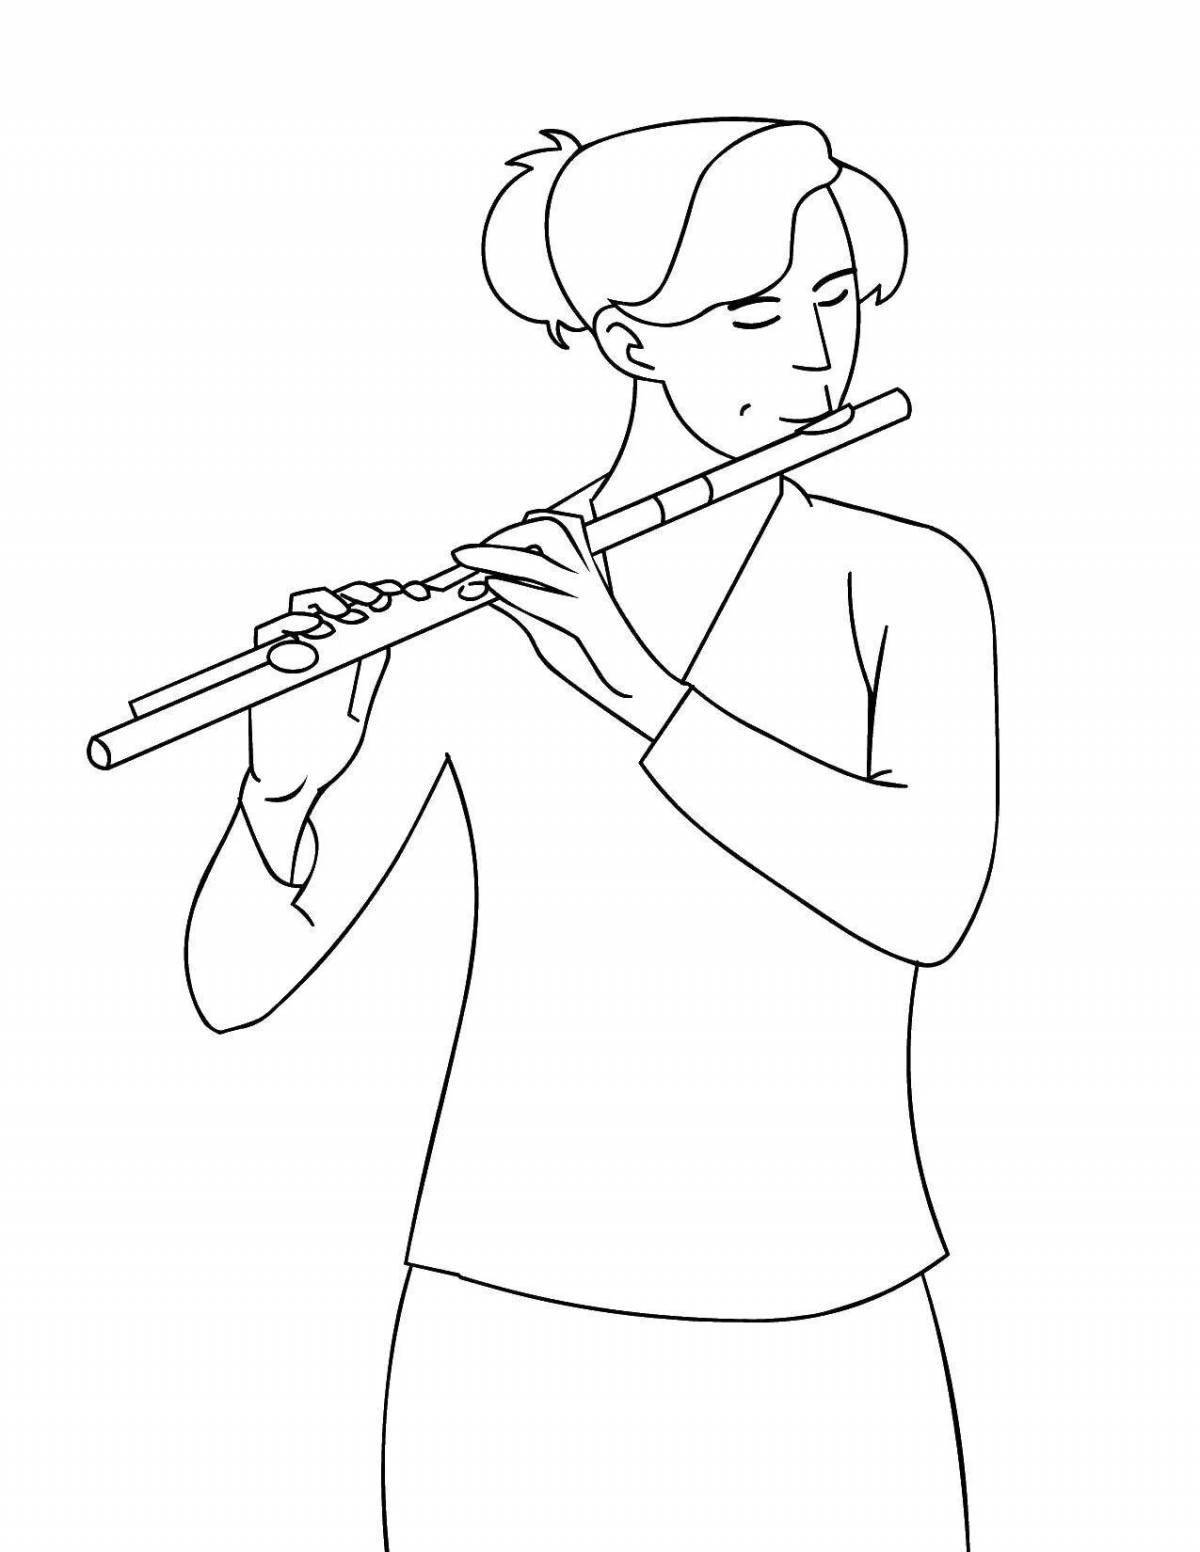 Amazing flute coloring page